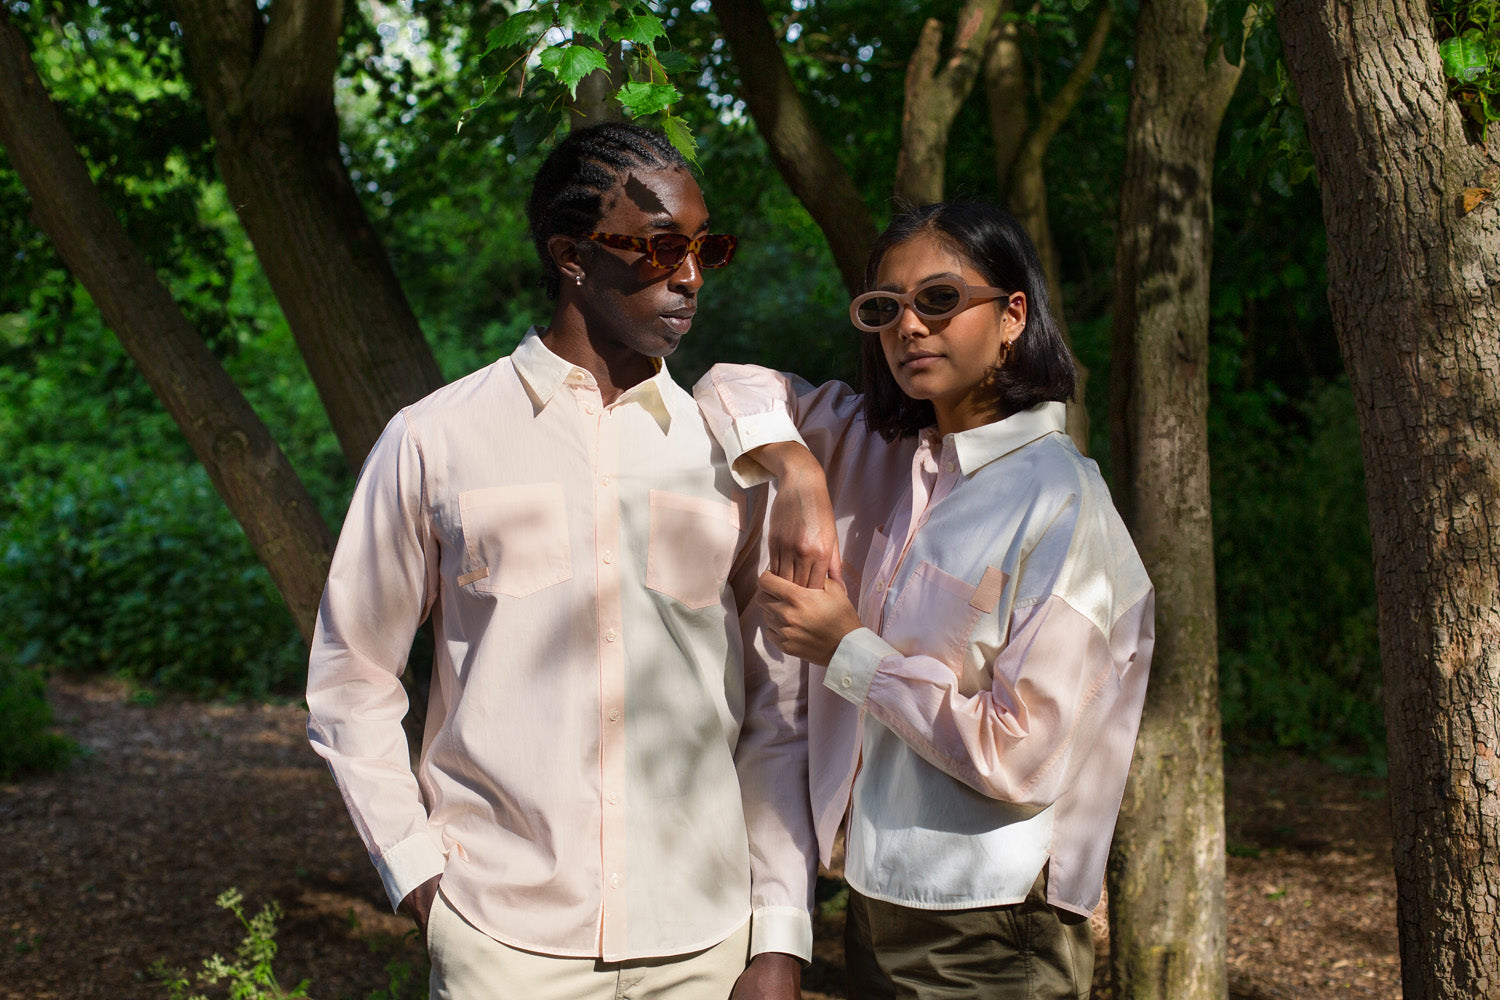 Two models stand side by side, under tree cover. He looks at her, whilst she has her elbow on his shoulder. They both wear pastel orange and yellow shirts and sunglasses. Saywood sustainable menswear and womenswear.